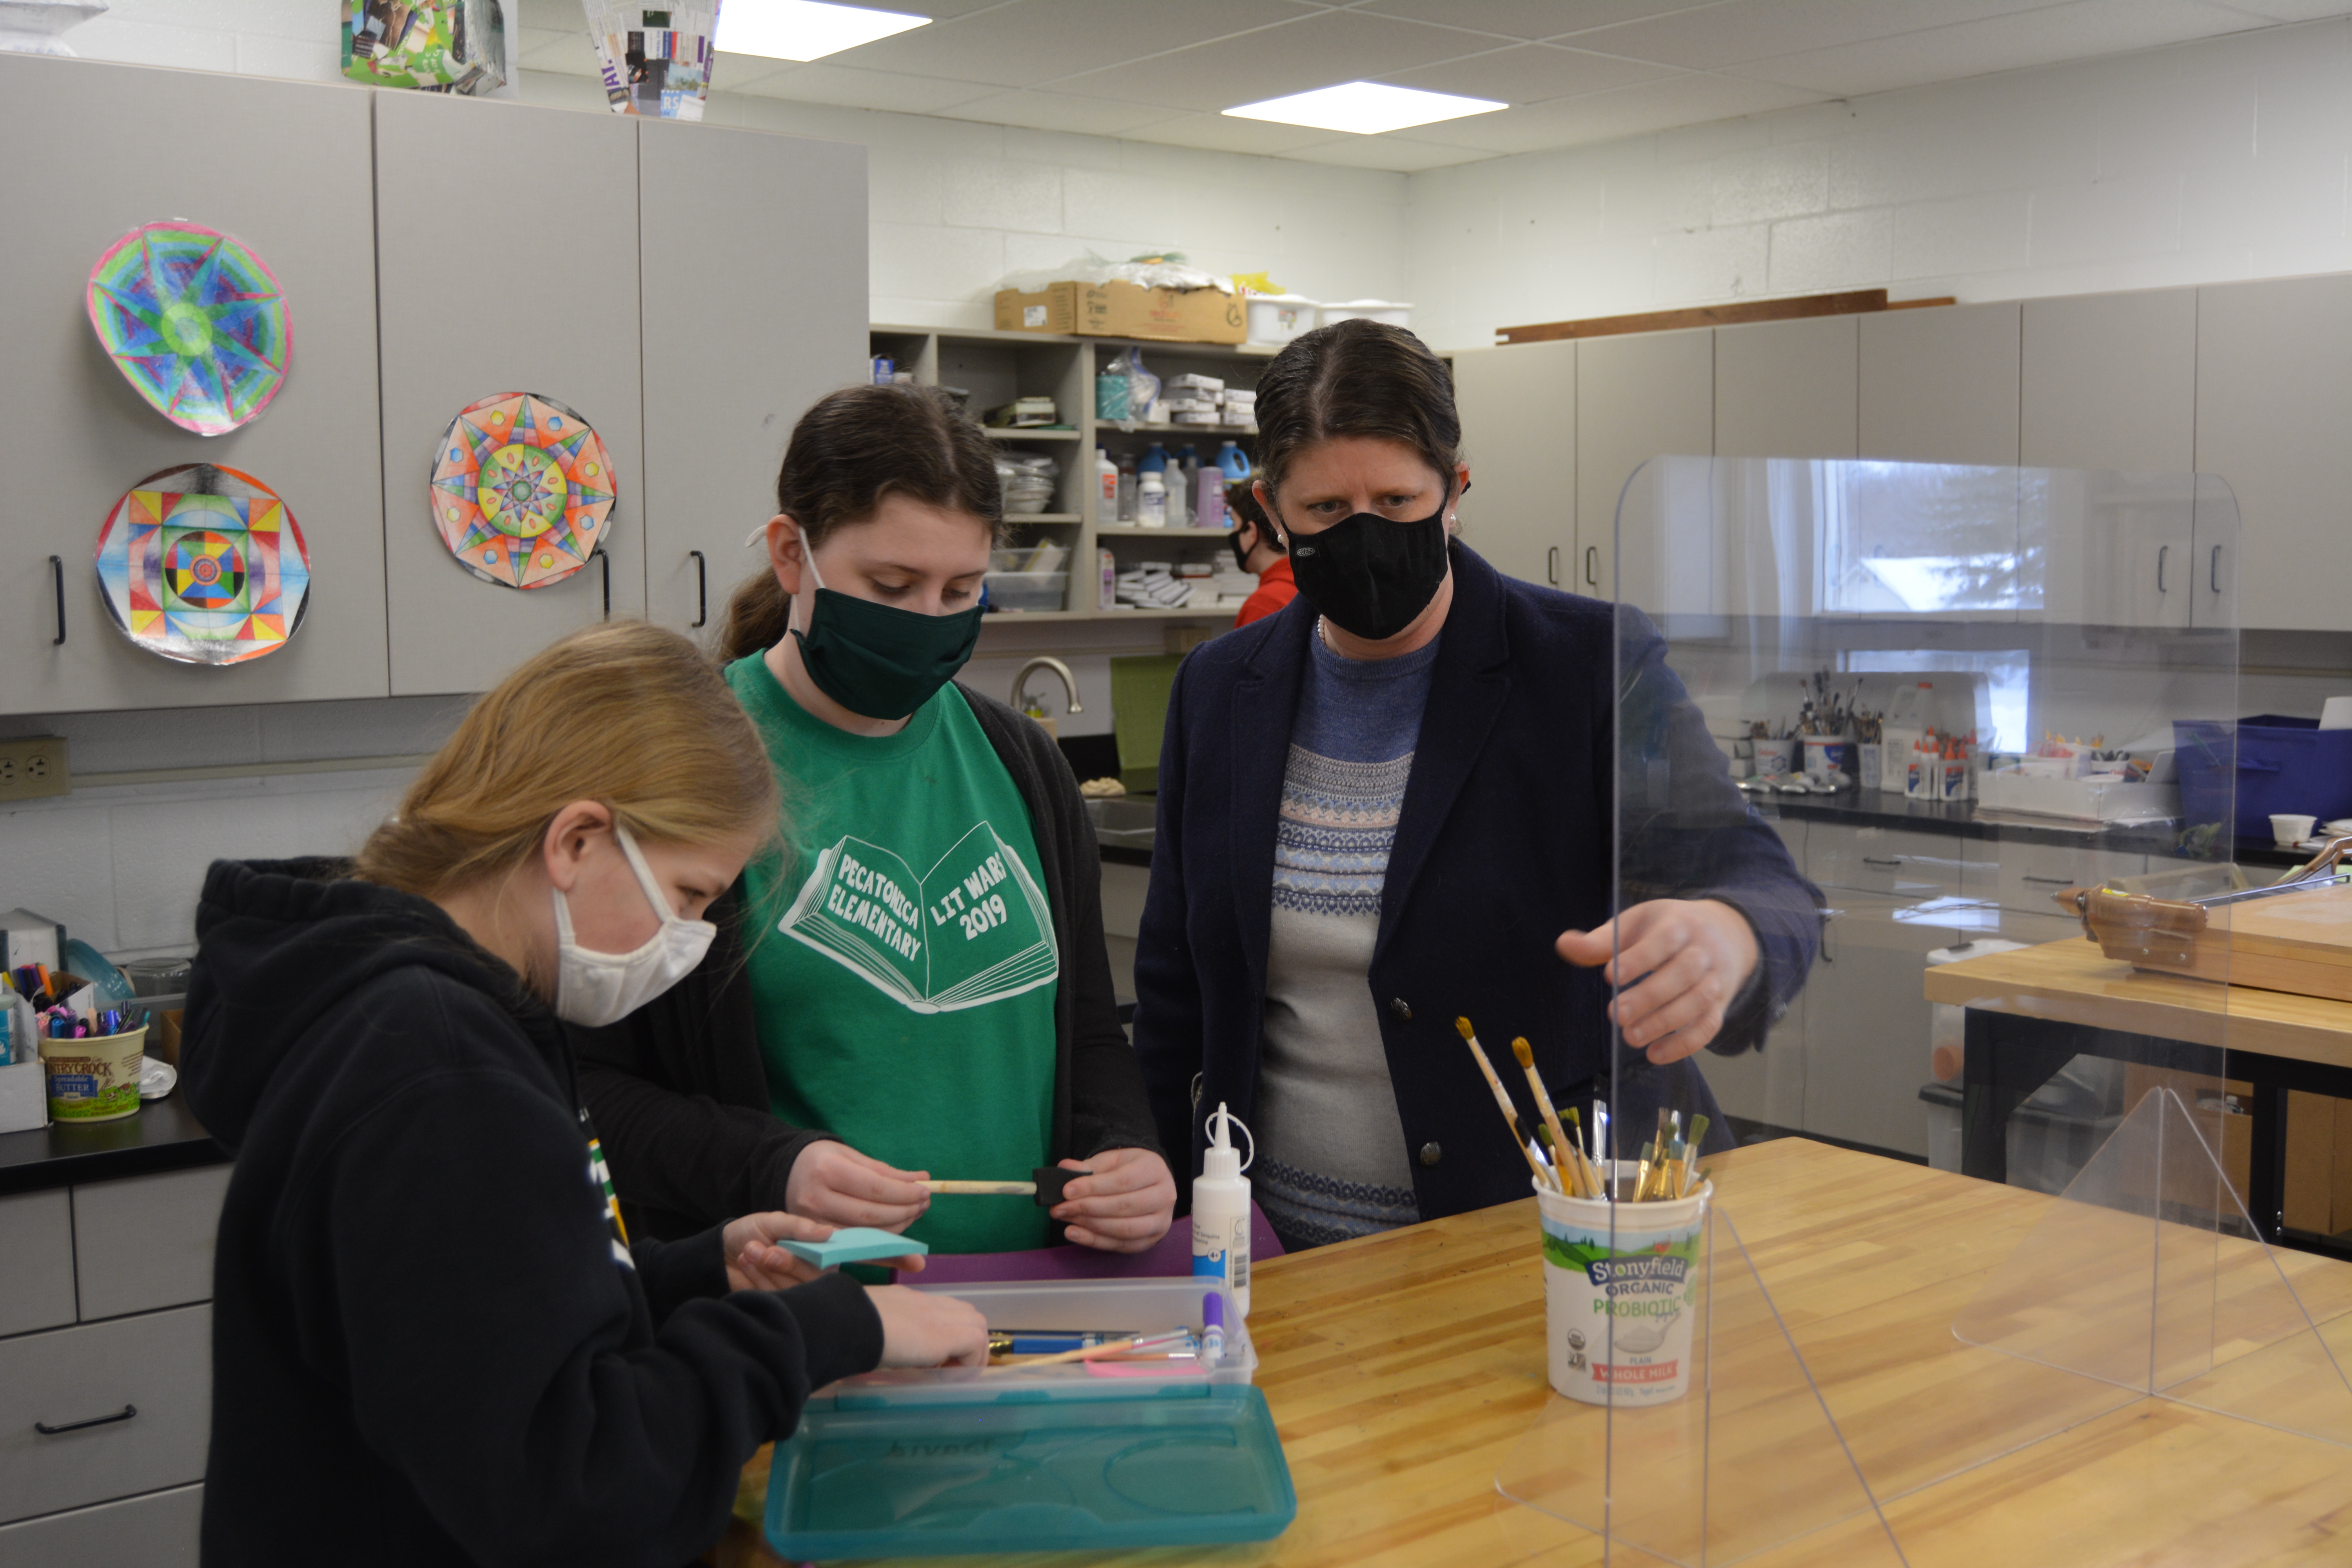 Students begin a project in an art class in the Pecatonica Area School District.